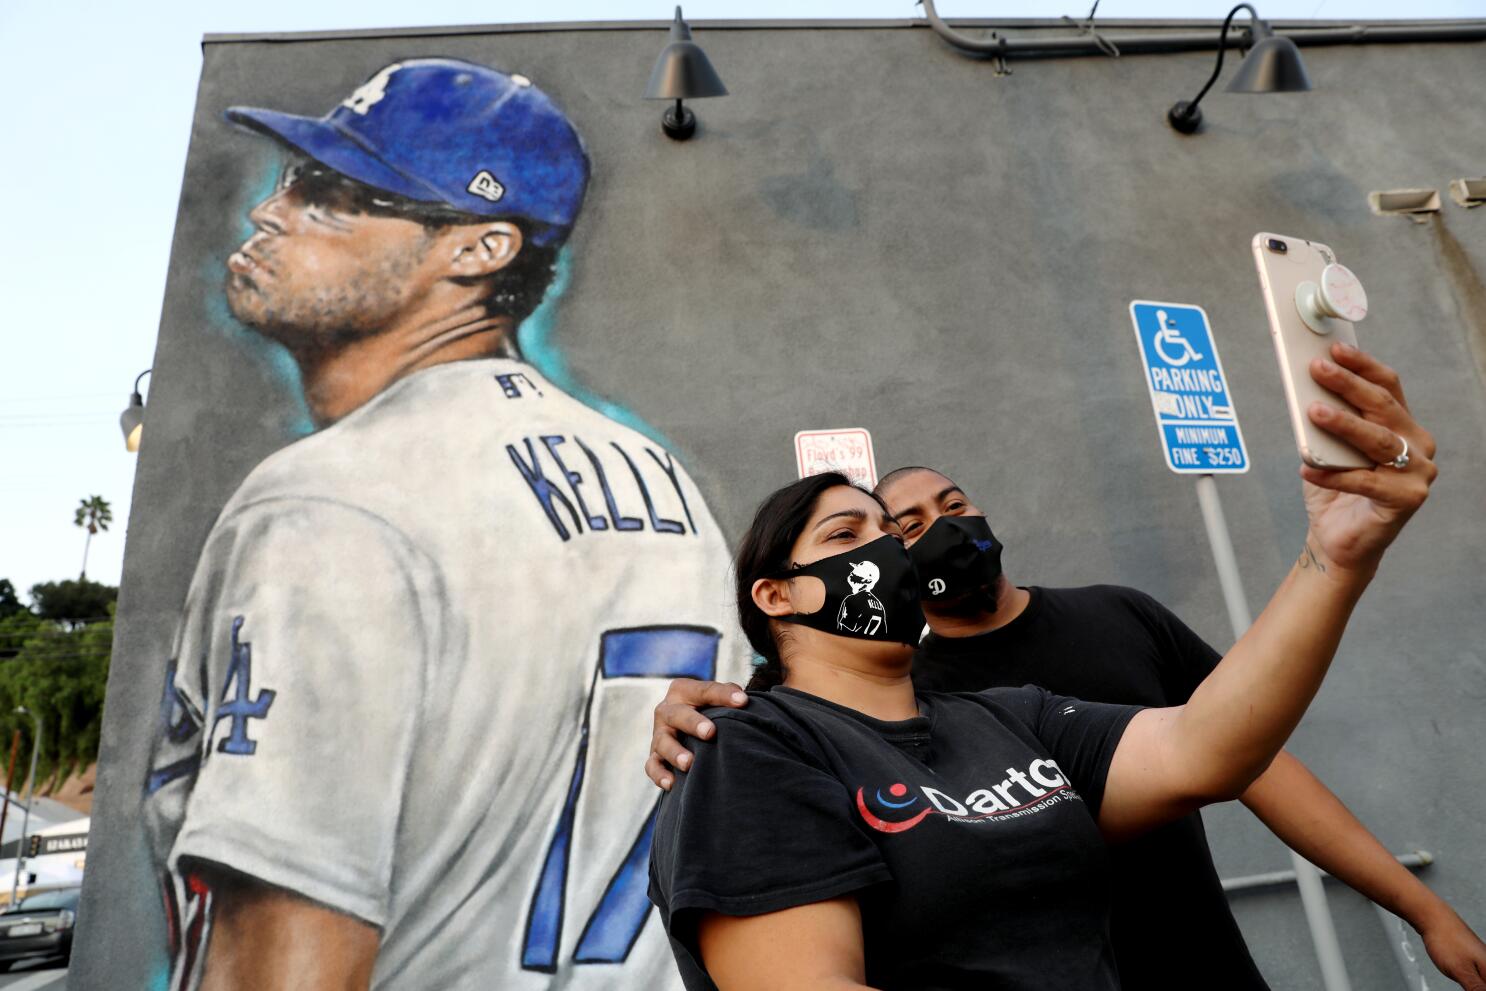 Joe Kelly pouty face mural painted near Dodger Stadium - Los Angeles Times